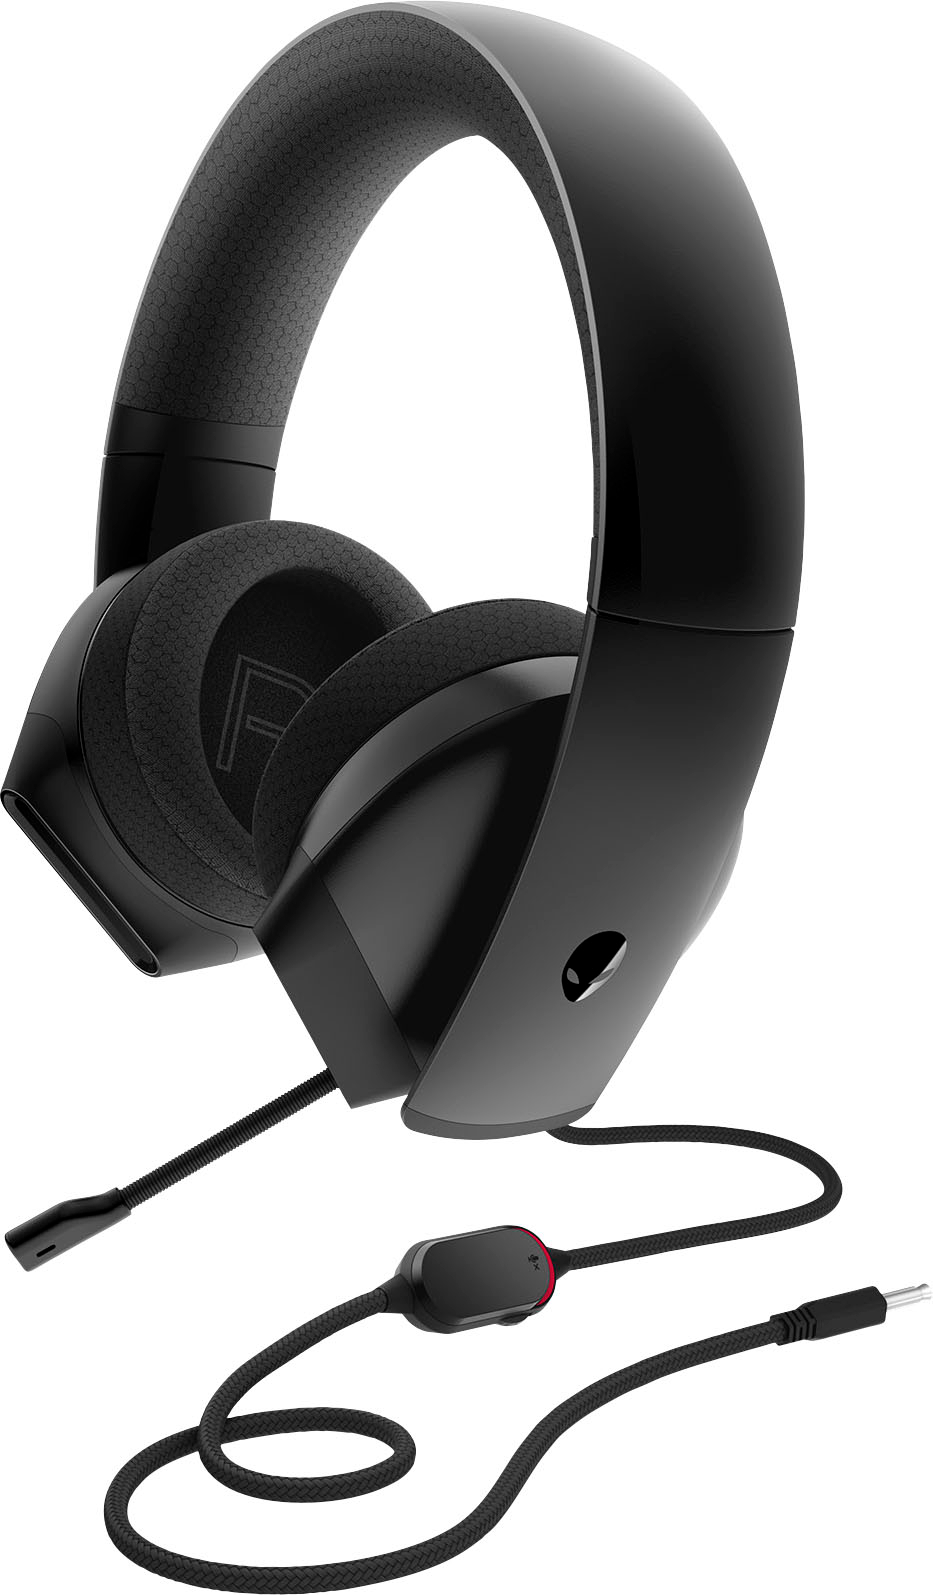 Angle View: AW310H Wired Stereo Gaming Headset for Alienware Area-51m and Inspiron 3590 - Gray